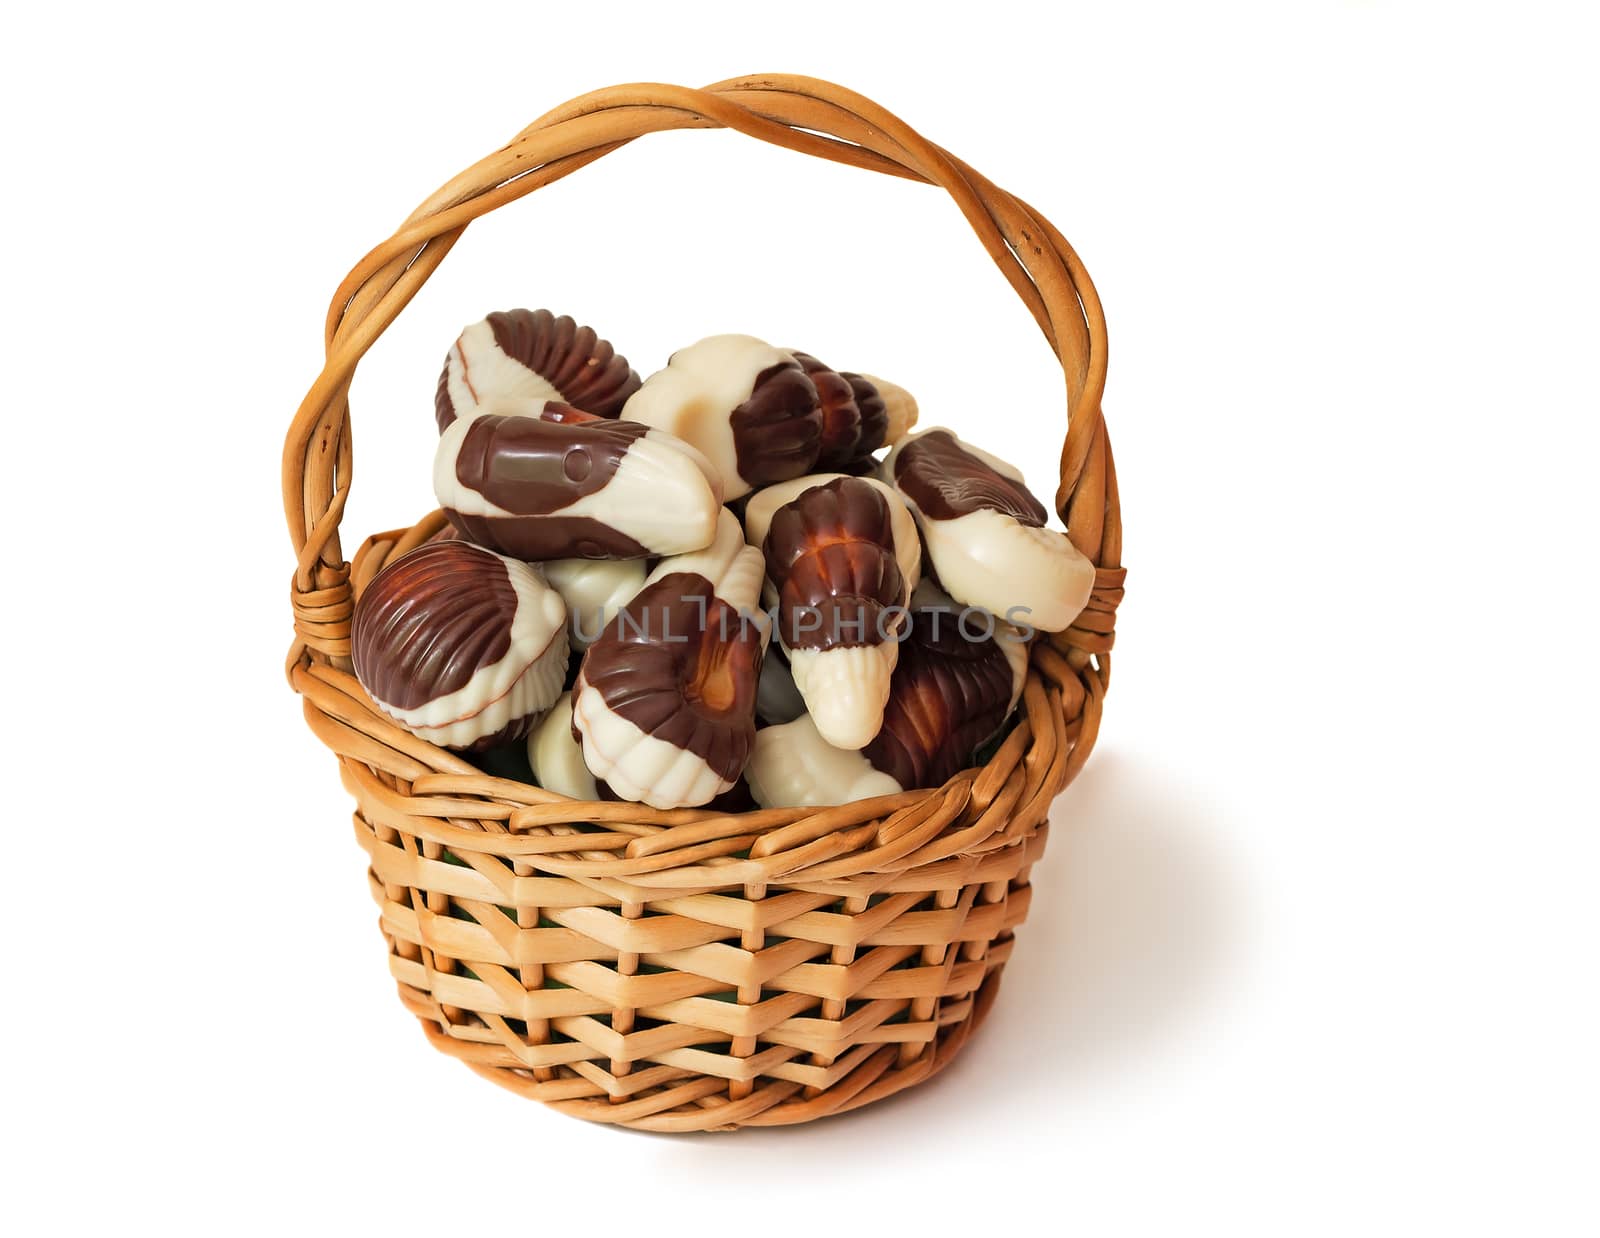 Chocolates in a wattled basket on a white background. by georgina198